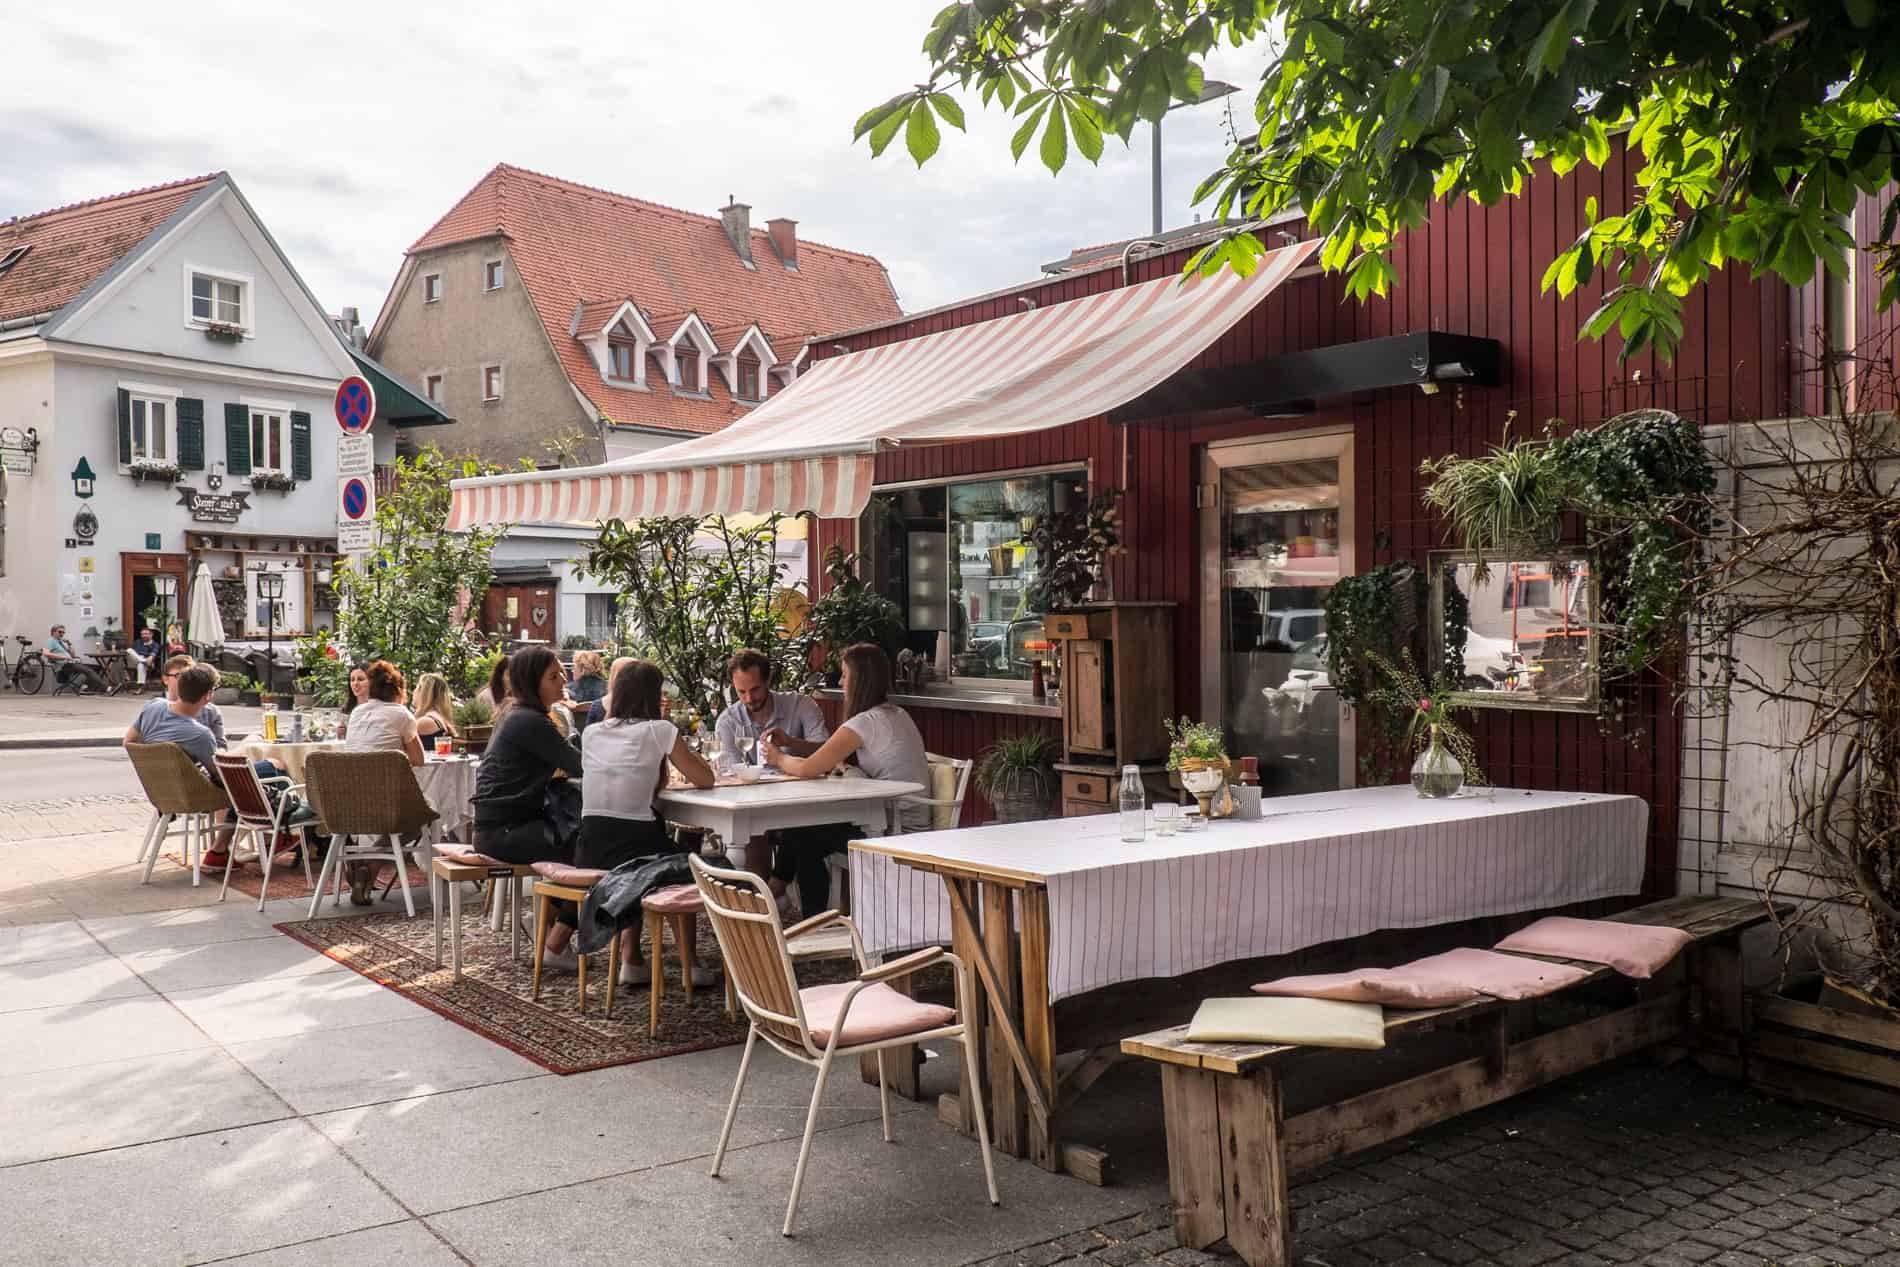 People eating outside at a restaurant in the Lend neighbourhood in Graz.